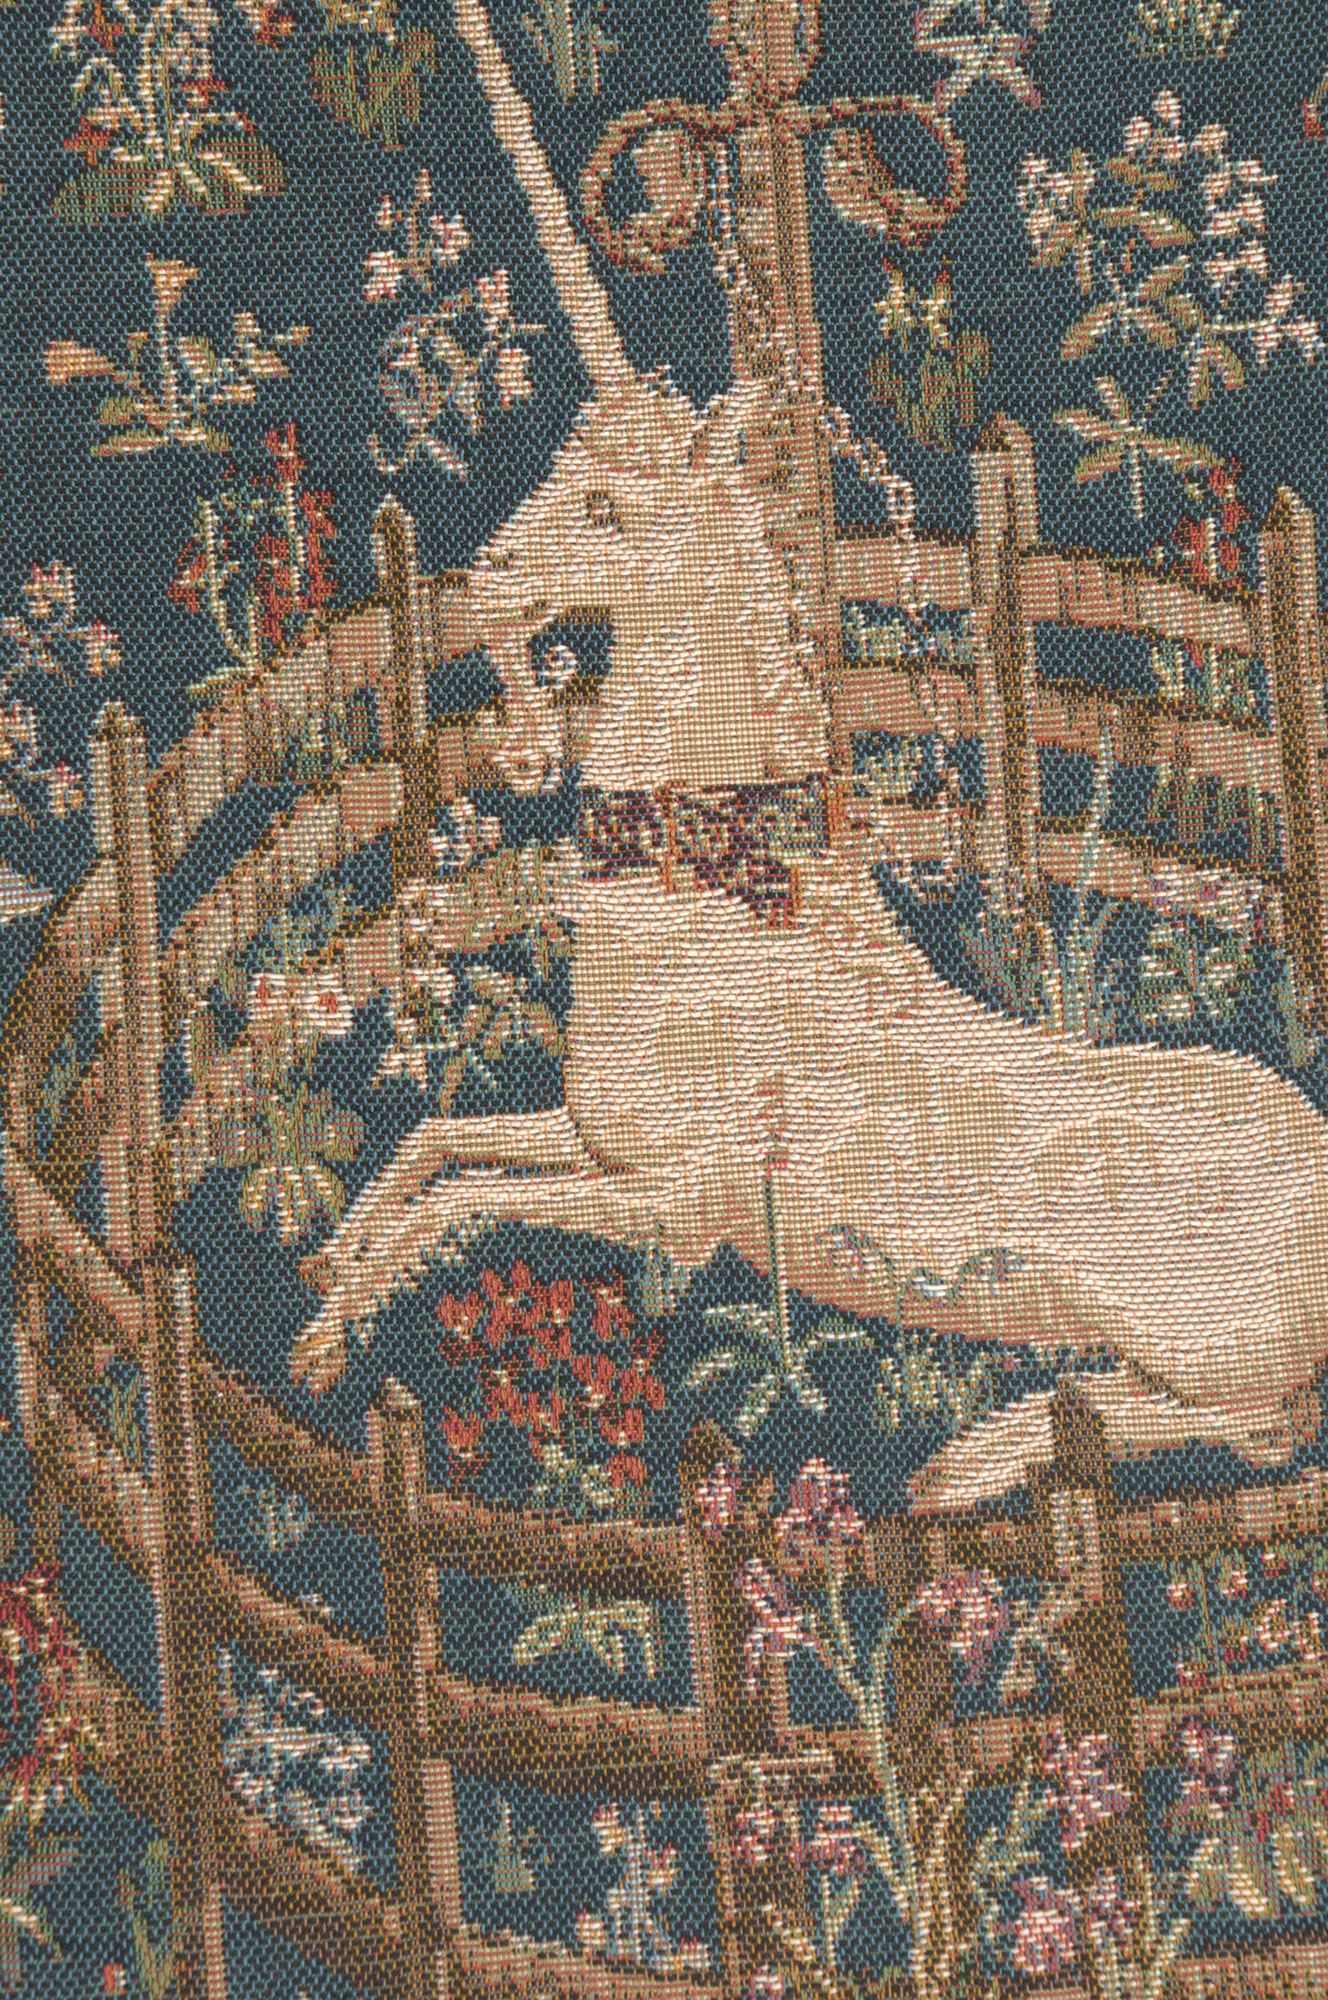 Licorne Captive Bleu Small French Tapestry Table Runner | Close Up 1